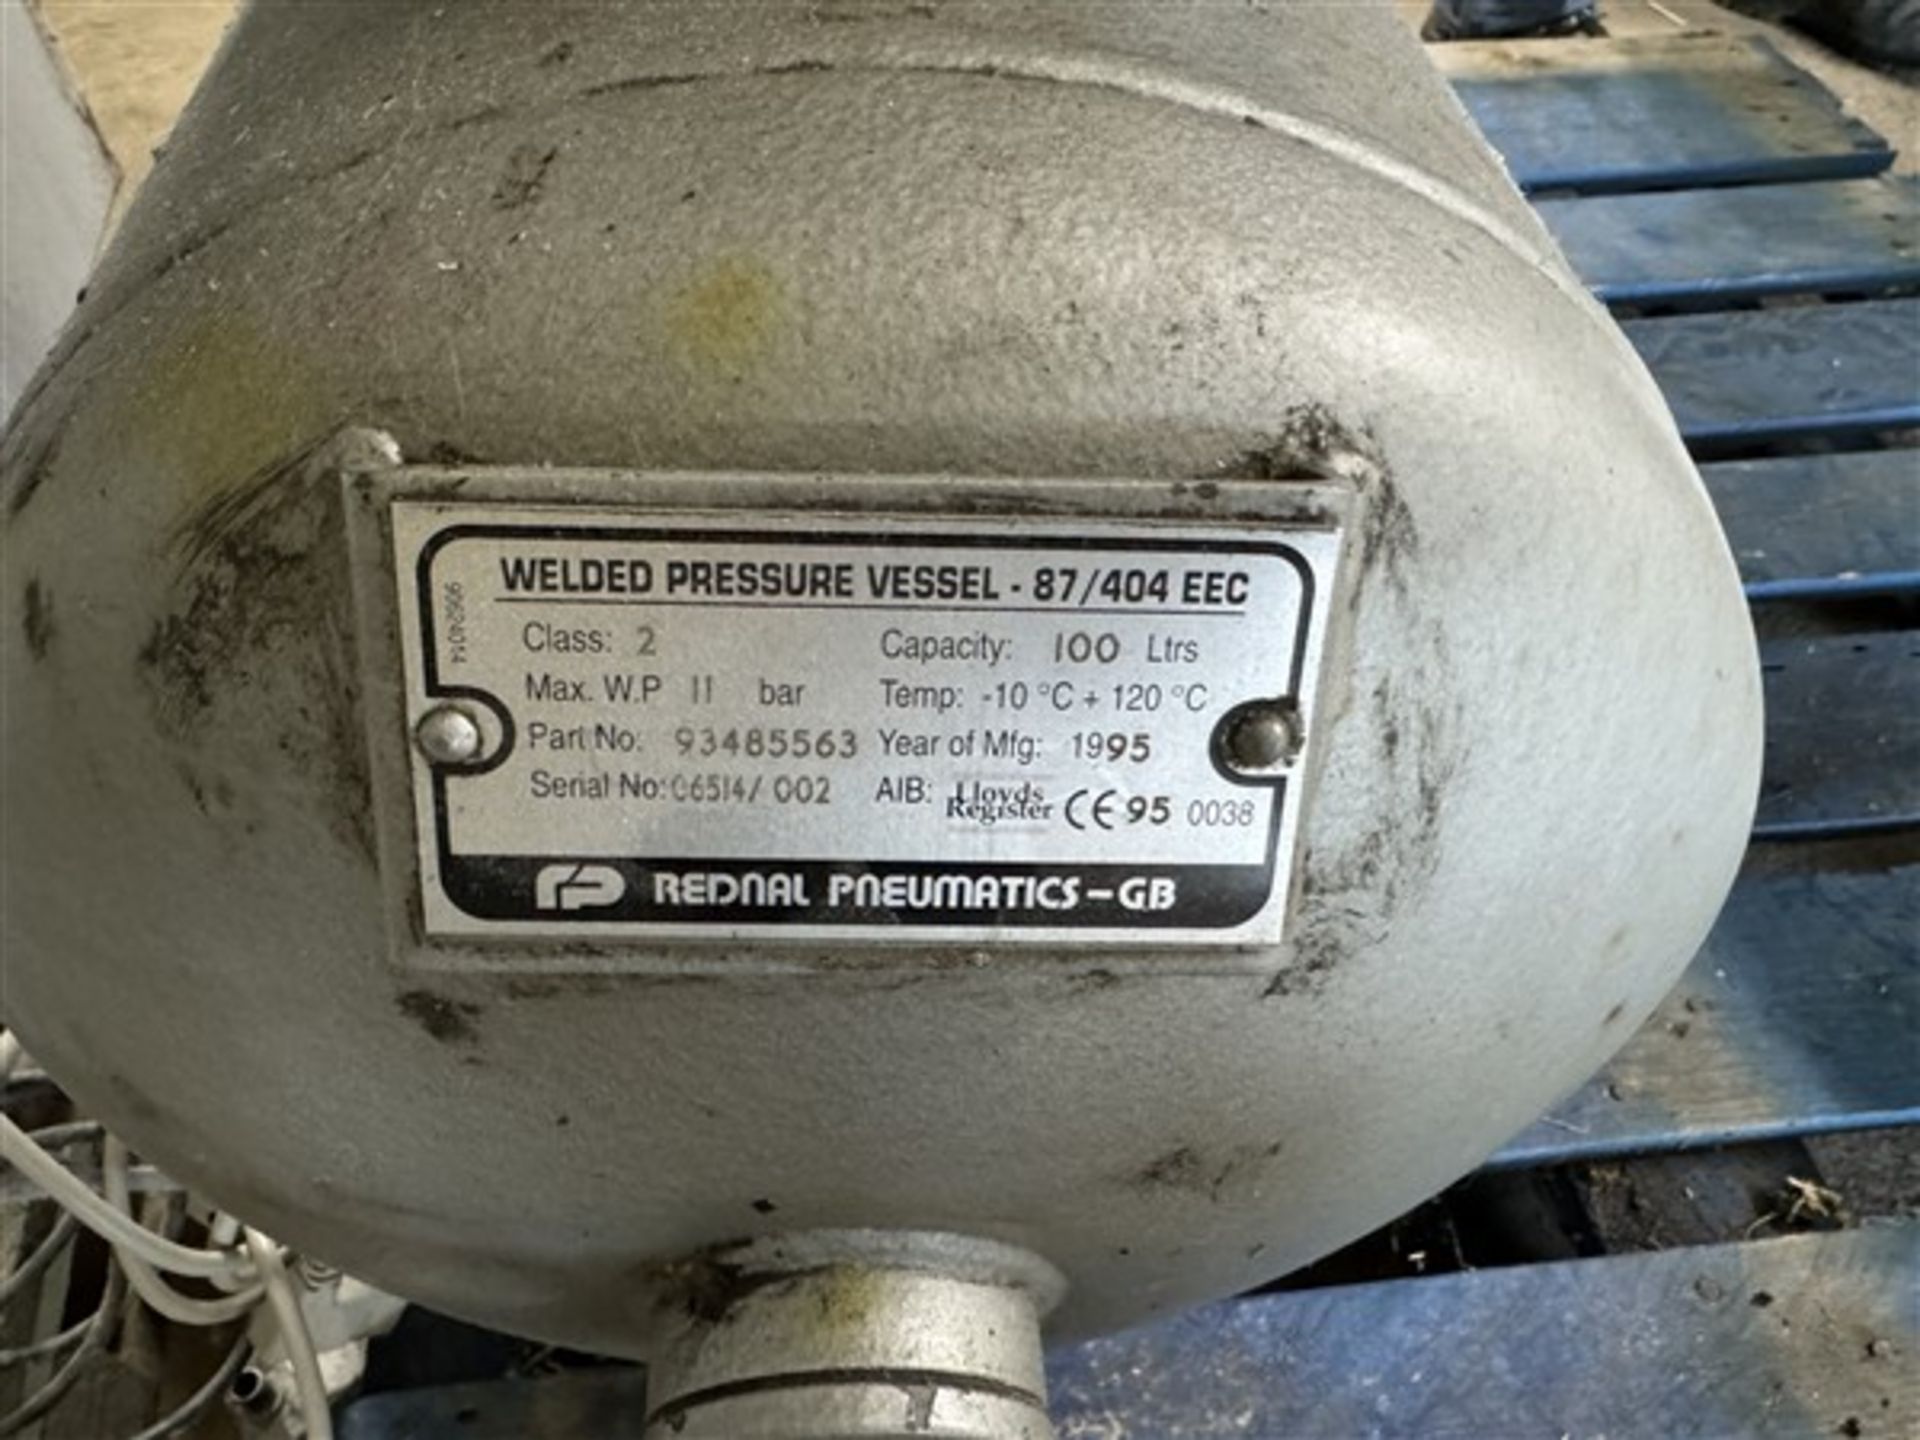 Hydrovane 'Ingersoll Rand' 100L air compressor, serial no. 06514/002, part no. 93485563, year 1995 - Image 4 of 7